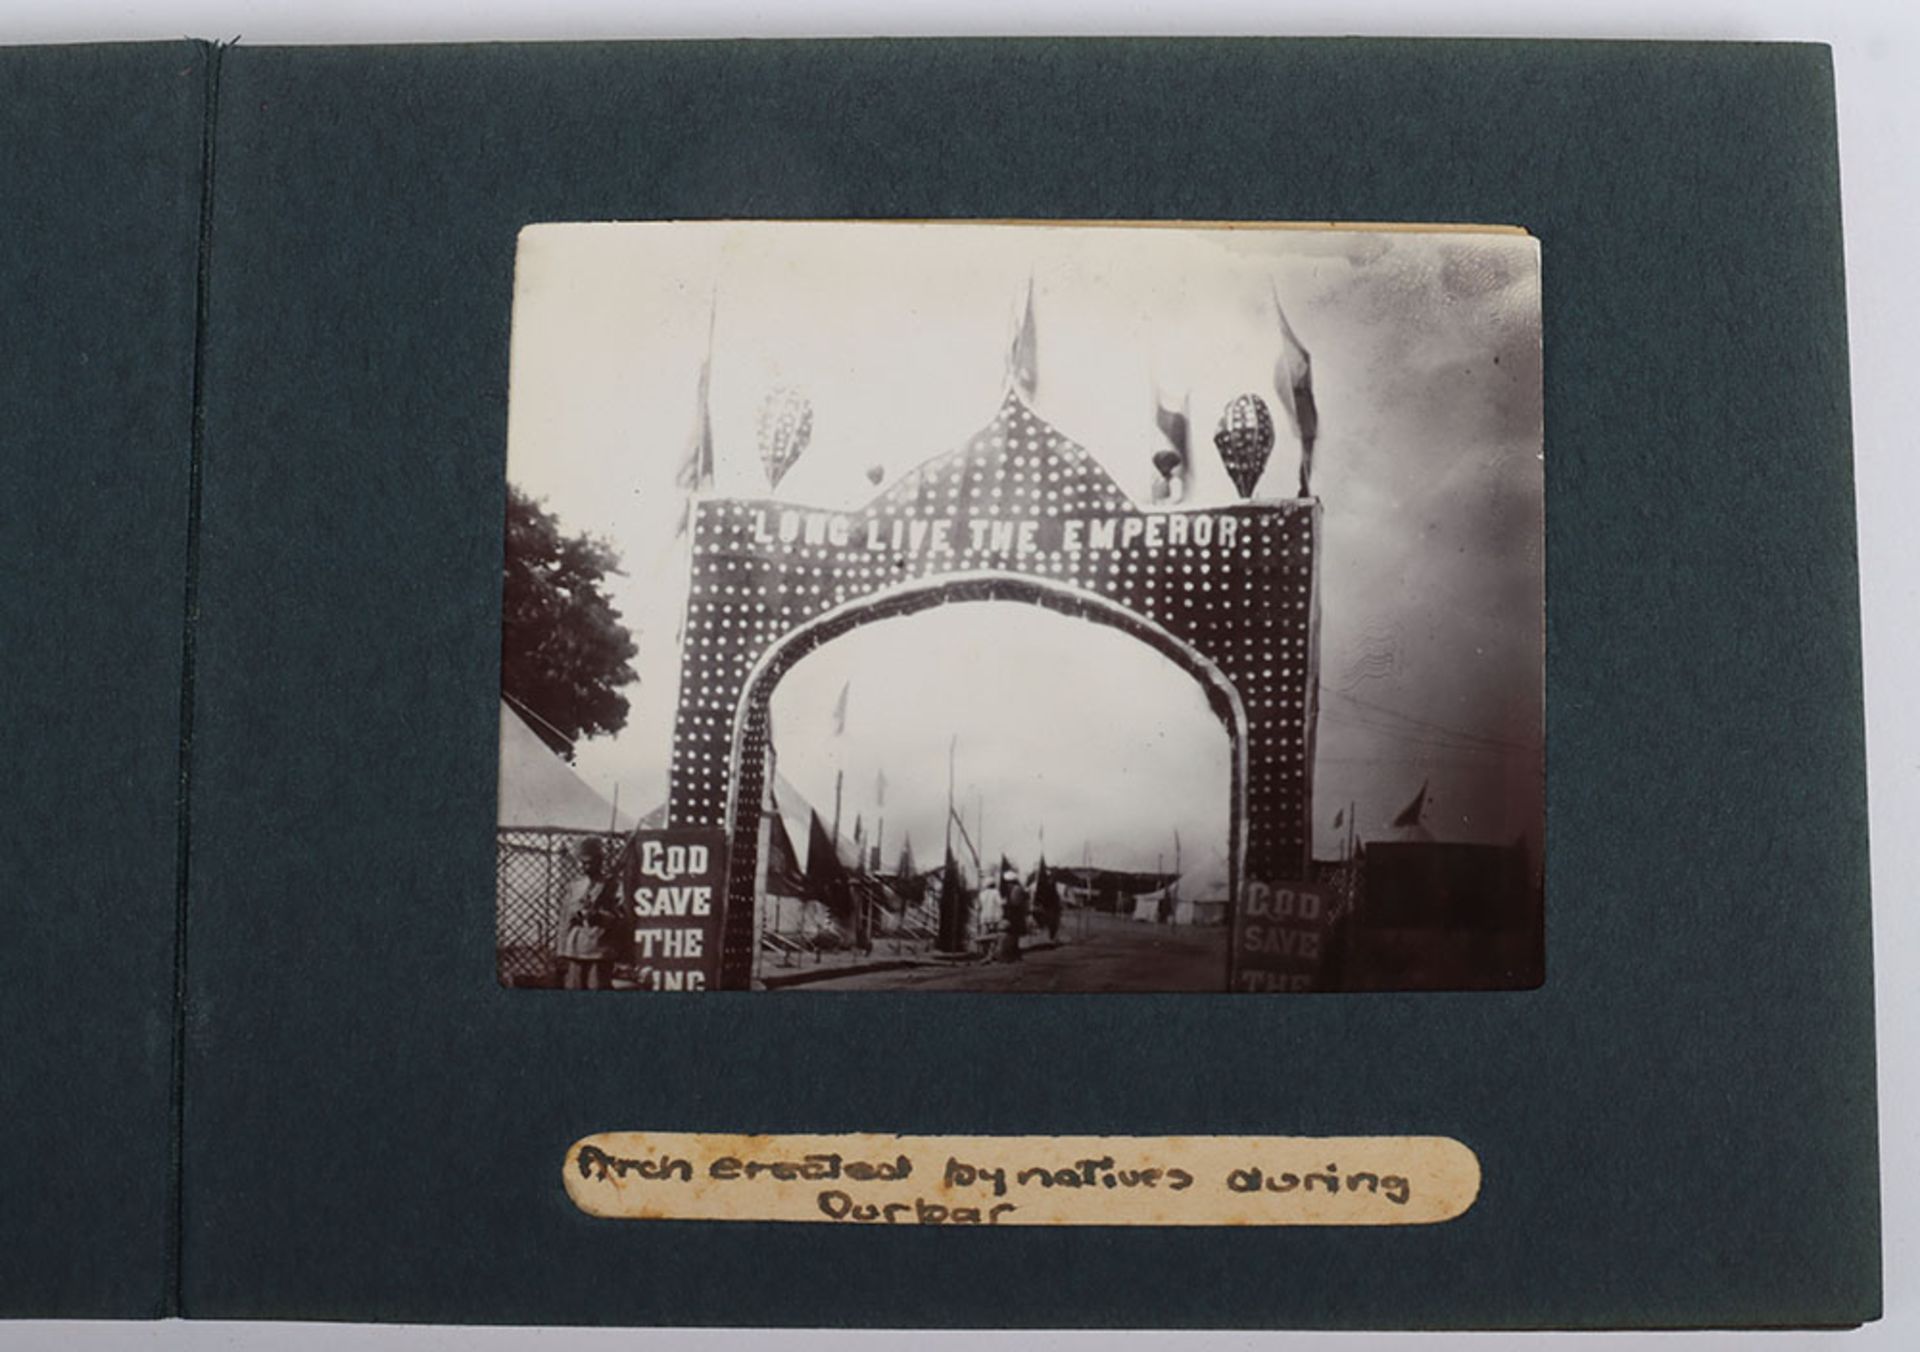 Photograph Album with images of ther Delhi Durbar, troops lining streets, Elephants, sacred cows bel - Image 46 of 48